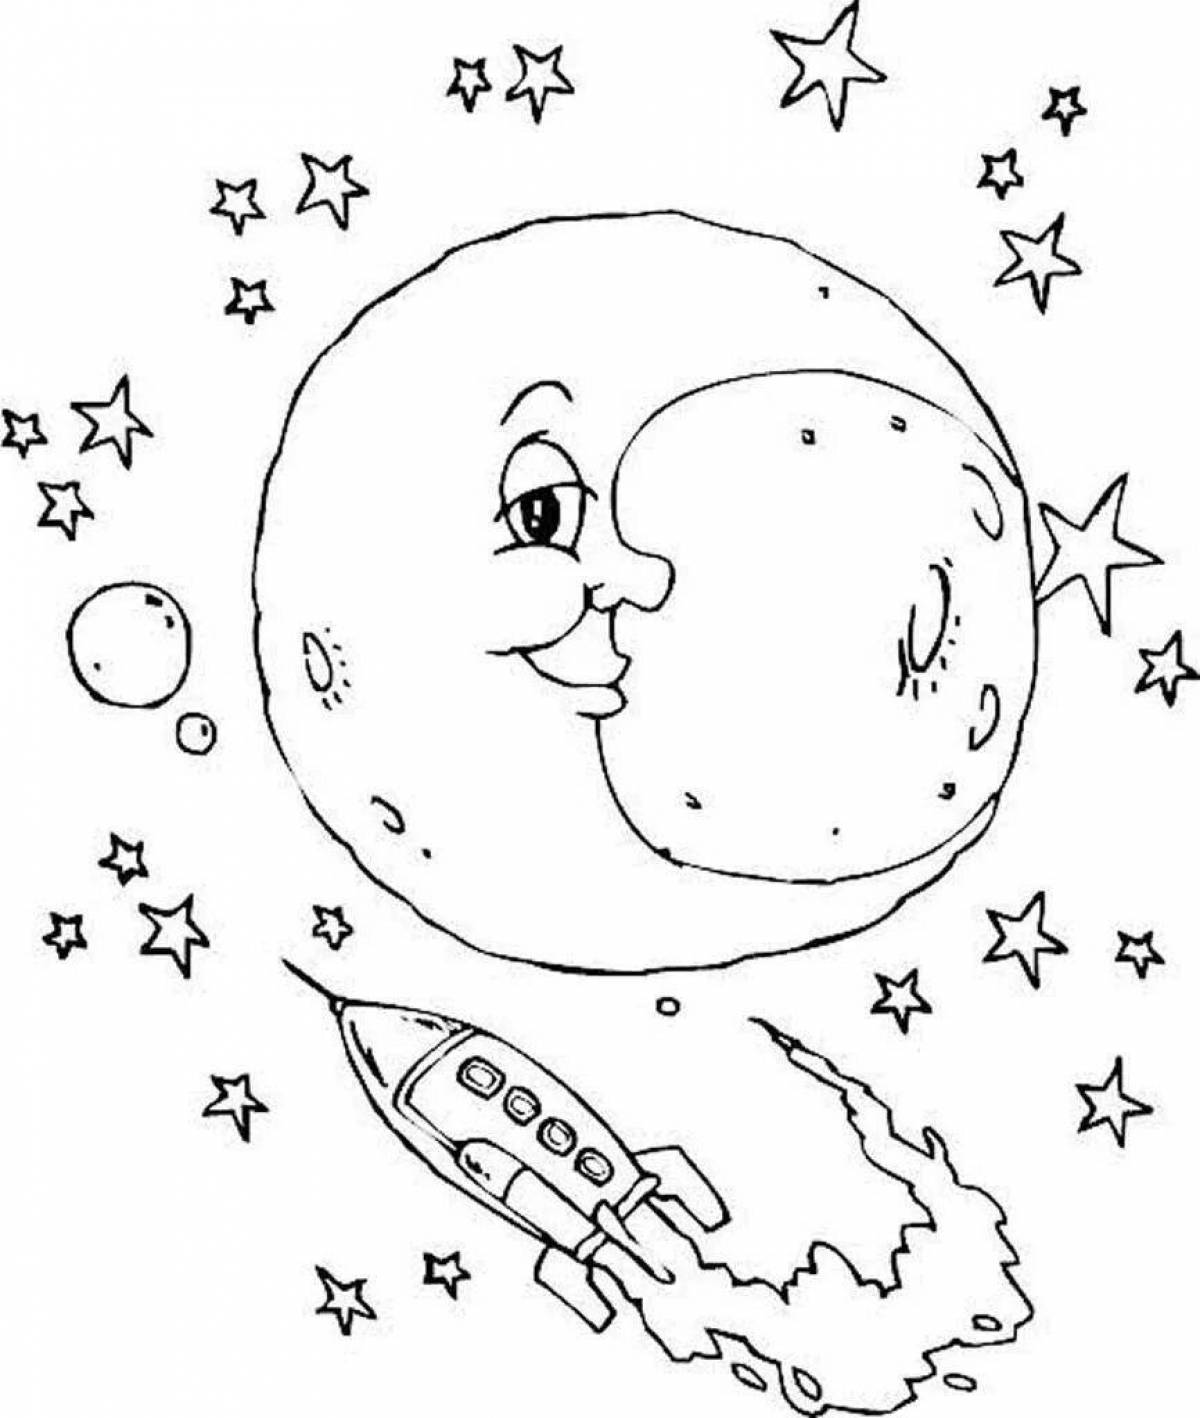 Outstanding space and planets coloring page for kids